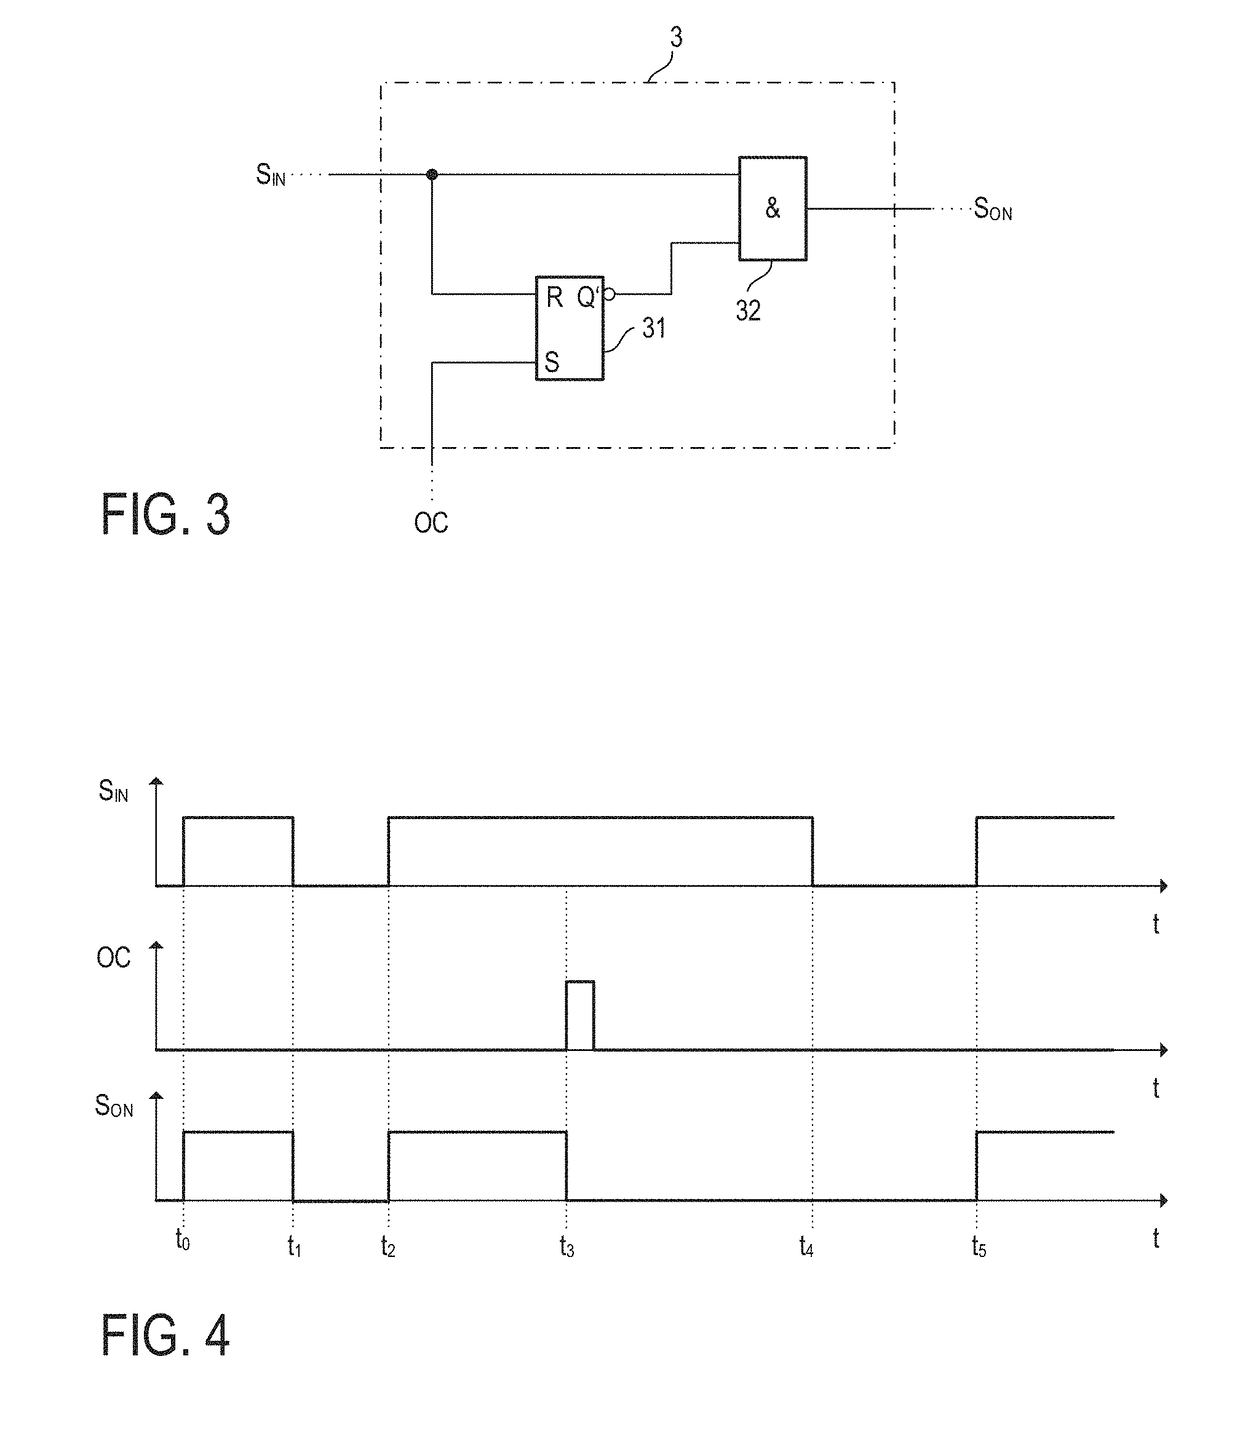 Electronic Switch for Electronic Fuse